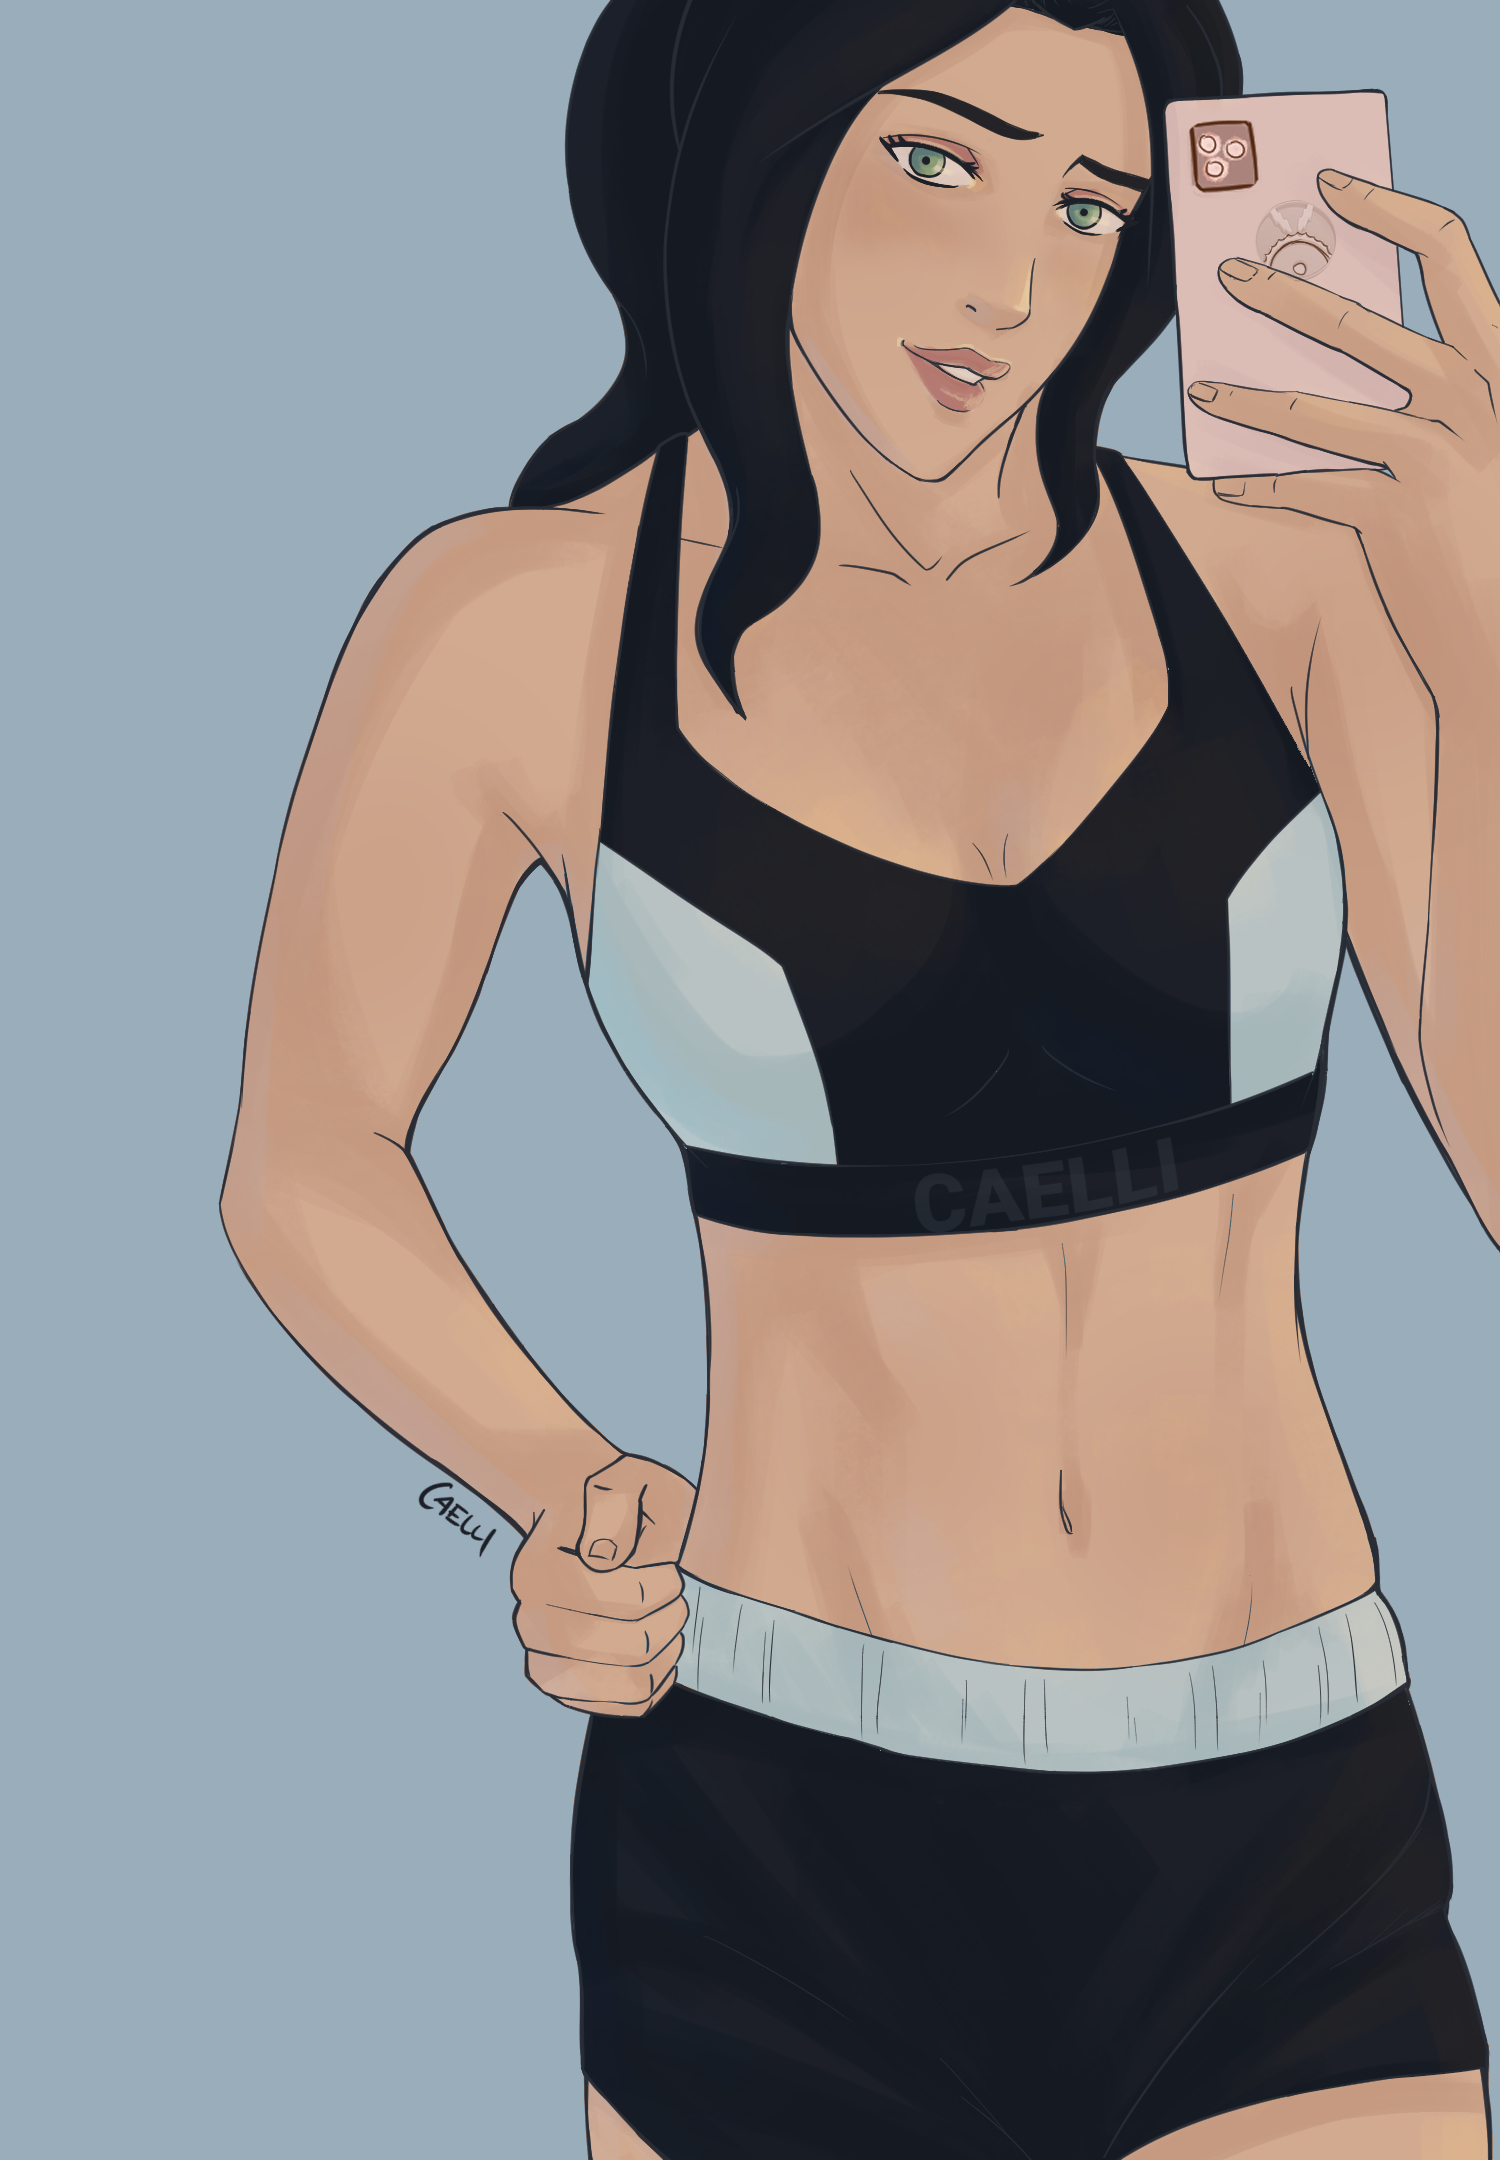 Asami's gym selfie showing off new sports bra and abs.